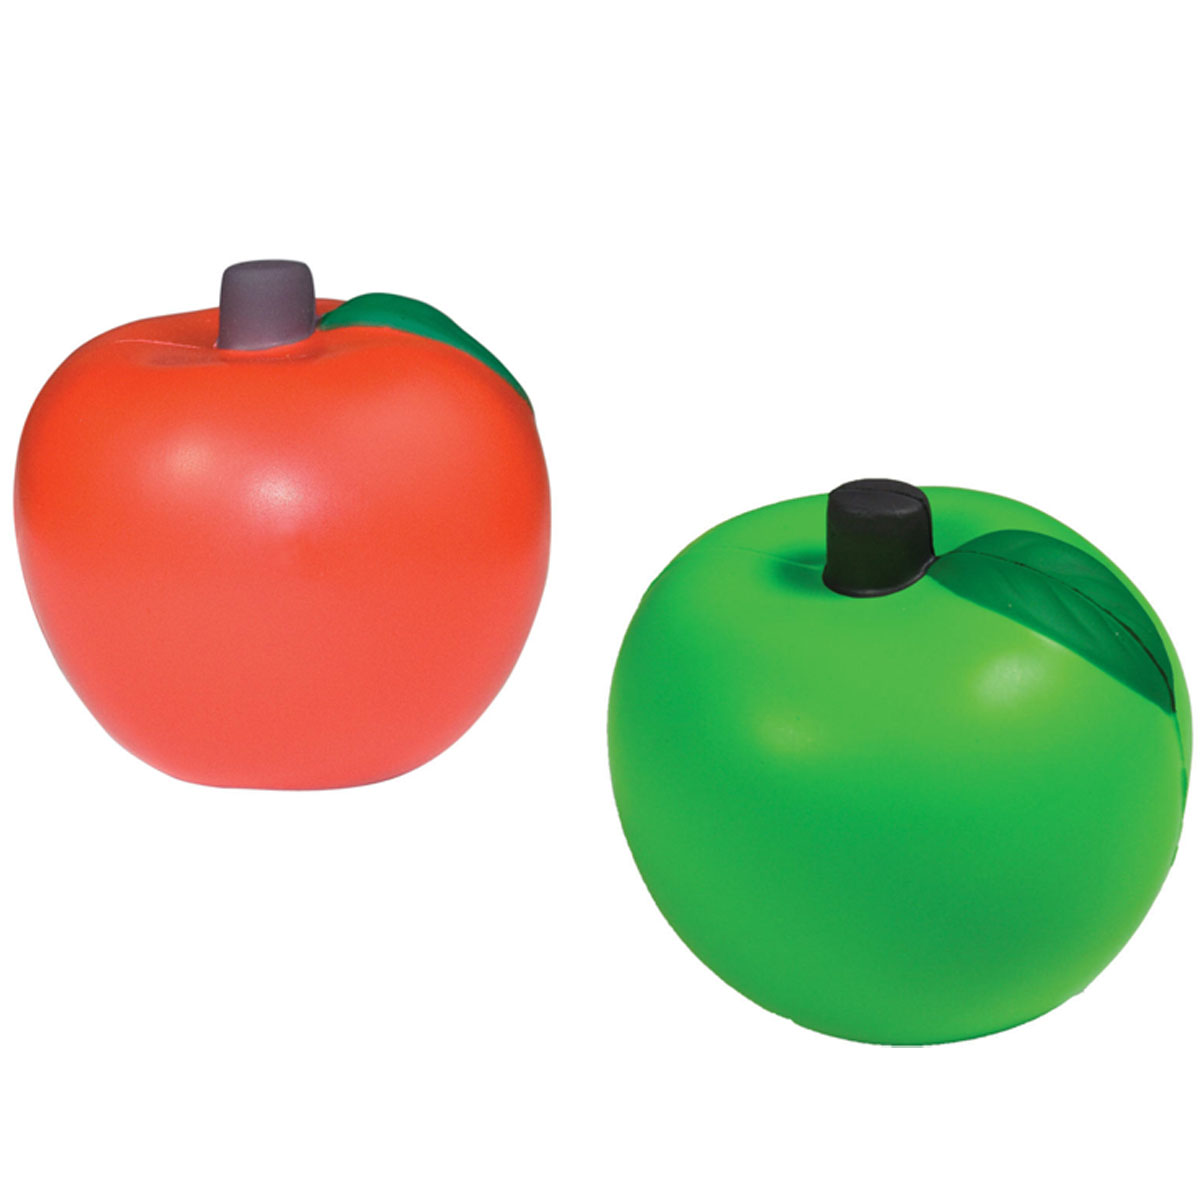 GL-AAD1066 Apple Shaped Stress Reliever